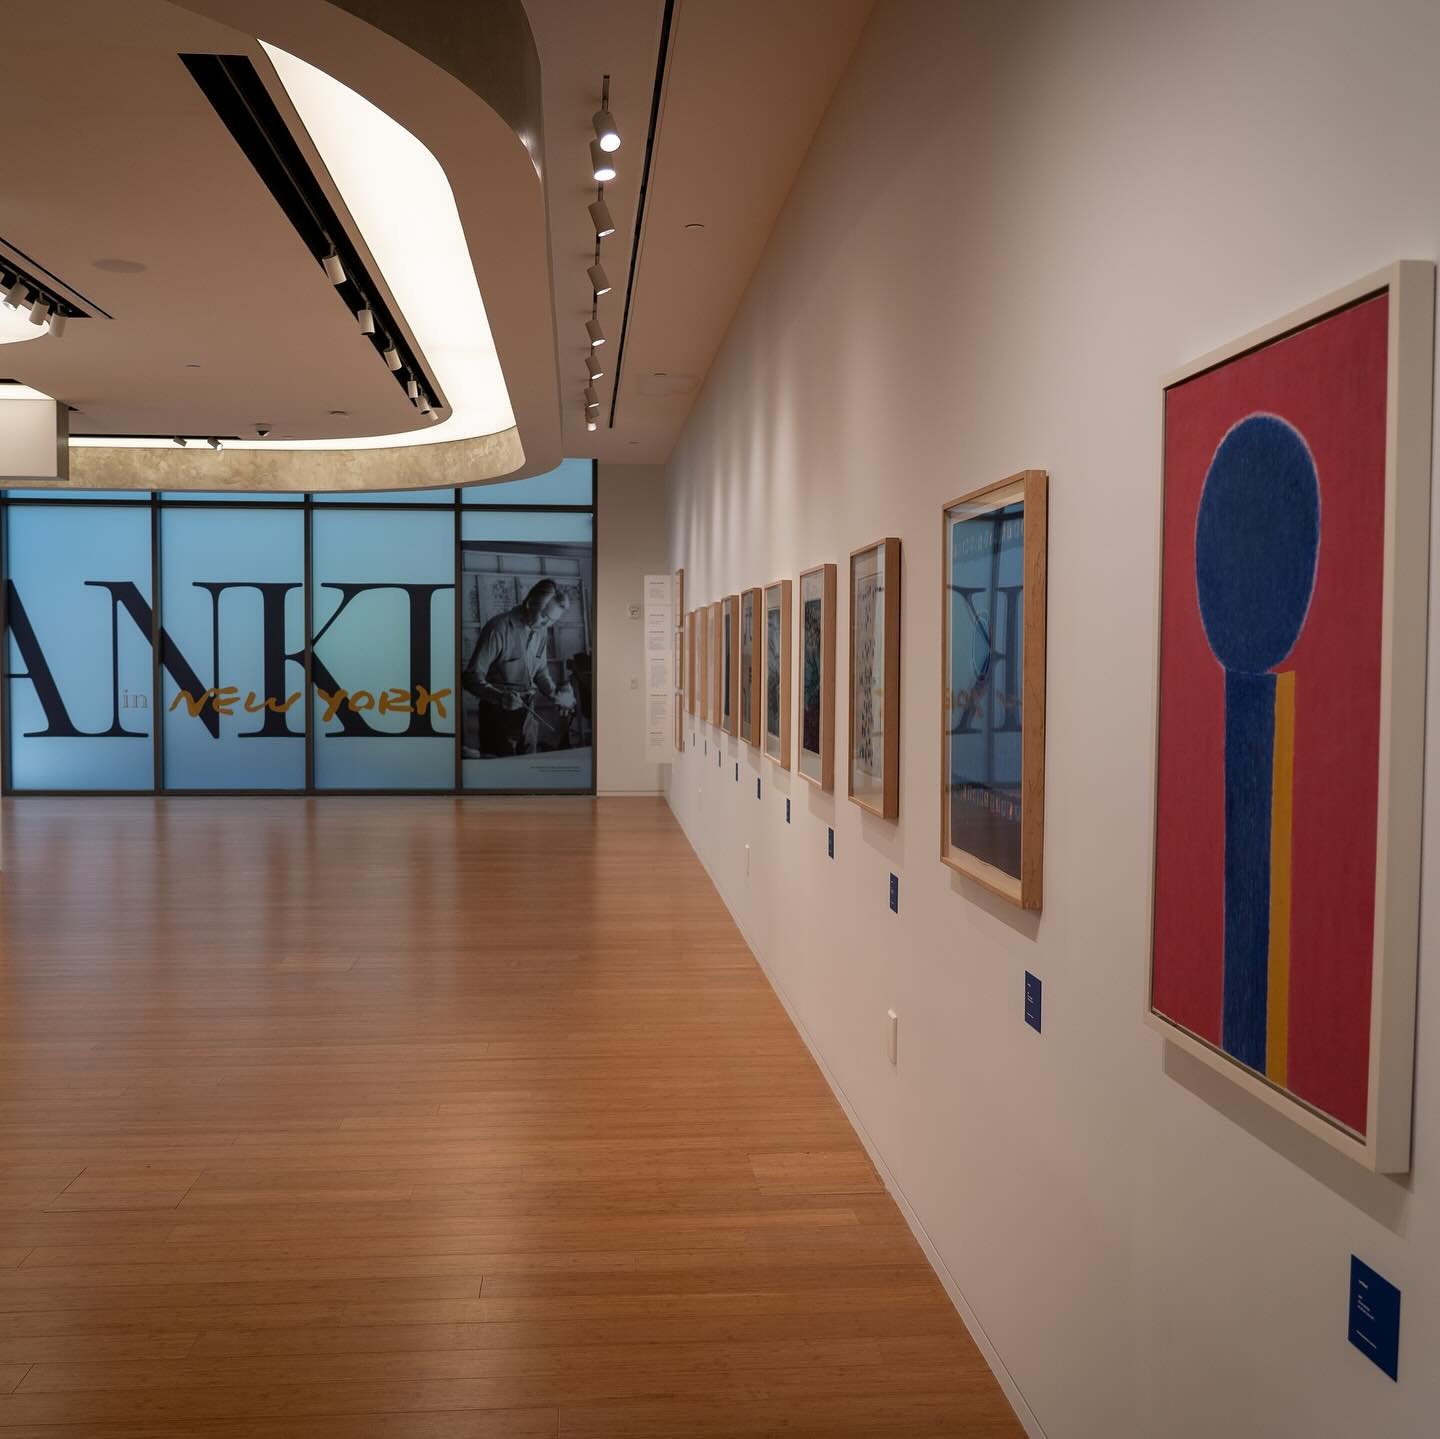 🎨✨ Exciting News! Dive deeper into the mesmerizing world of modern art with our brand new Guided Tour Program at the Korean Cultural Center New York! Join us for enlightening tours of our special exhibition, &ldquo;Whanki in New York.&rdquo; 🗽🖼️

